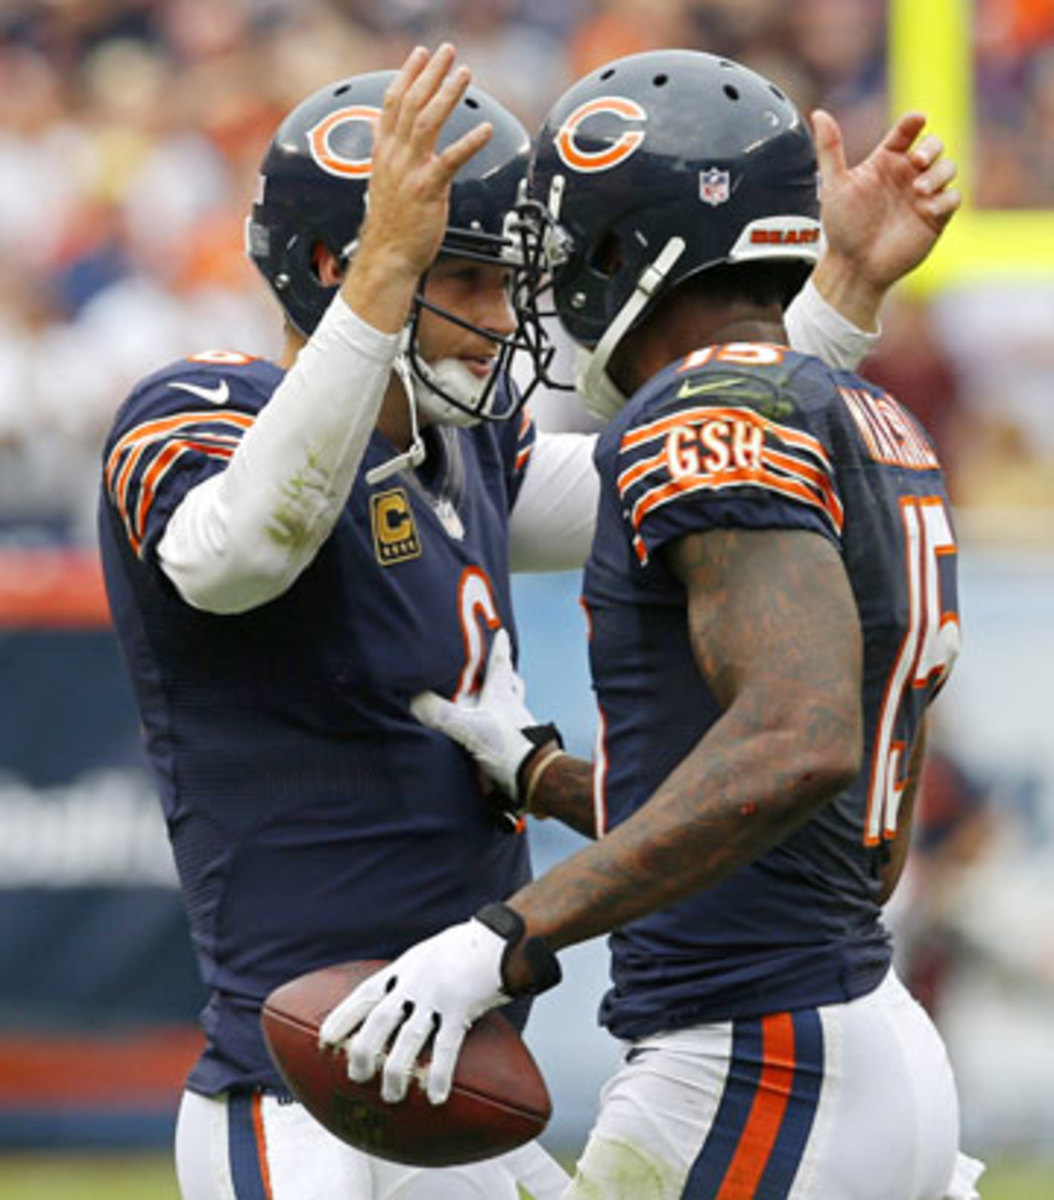 Cutler found Marshall for a 19-yard touchdown that capped an eight-play, 81-yard drive and held up as the winning score.